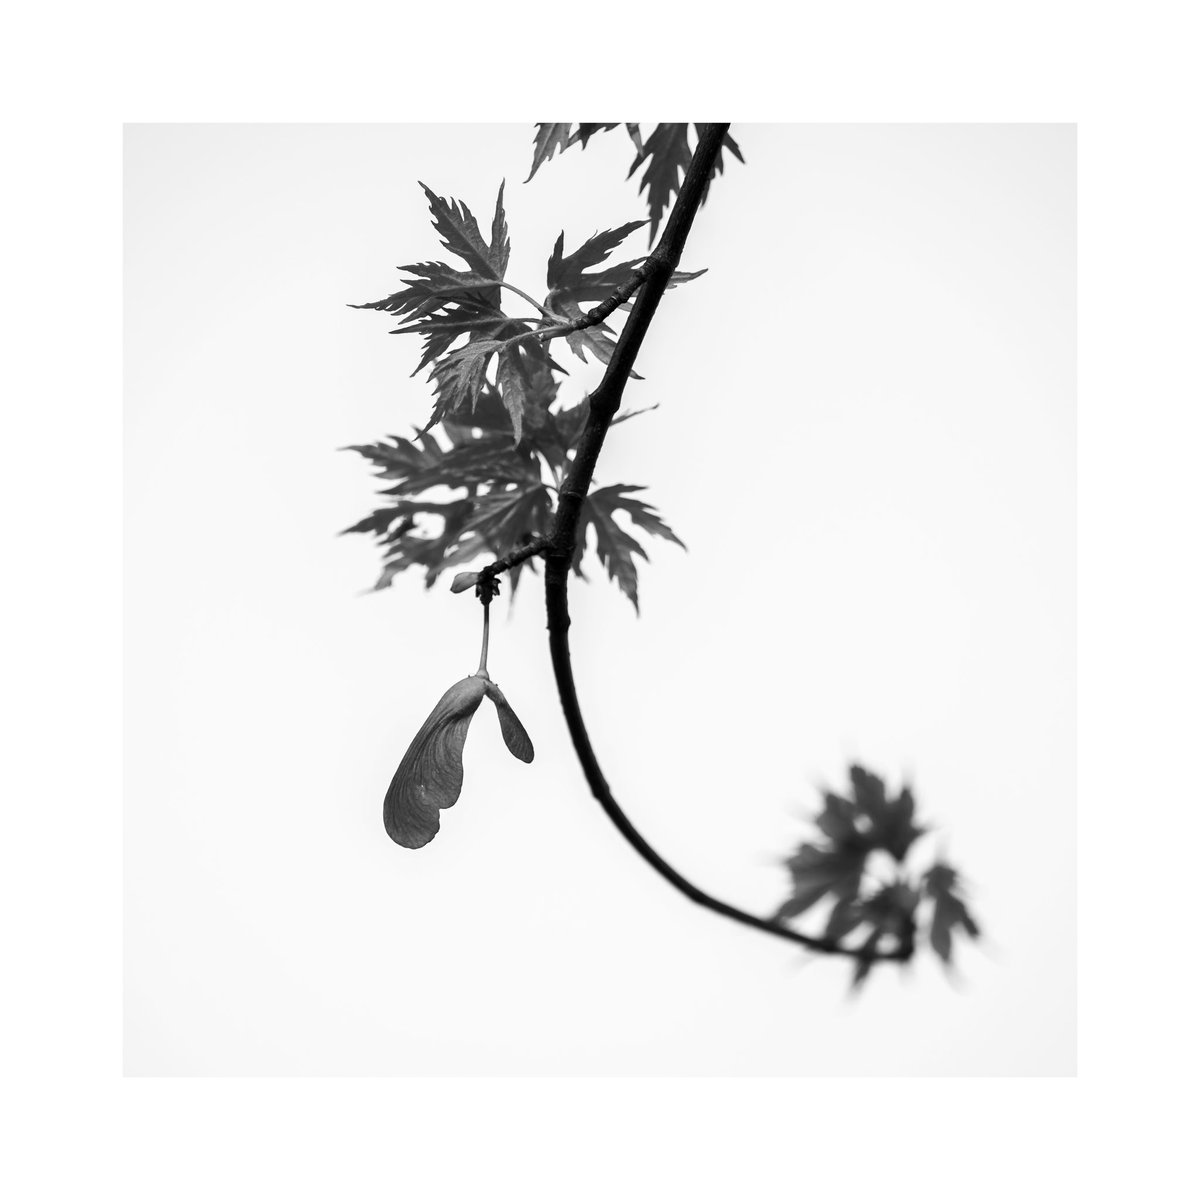 Four new studies of new leaves growing on a Silver Maple. I don't think this will develop into a project as large as my one on willow trees. But I would like to return when the leaves have taken their distinct shape. #photography #monochrome #bnw